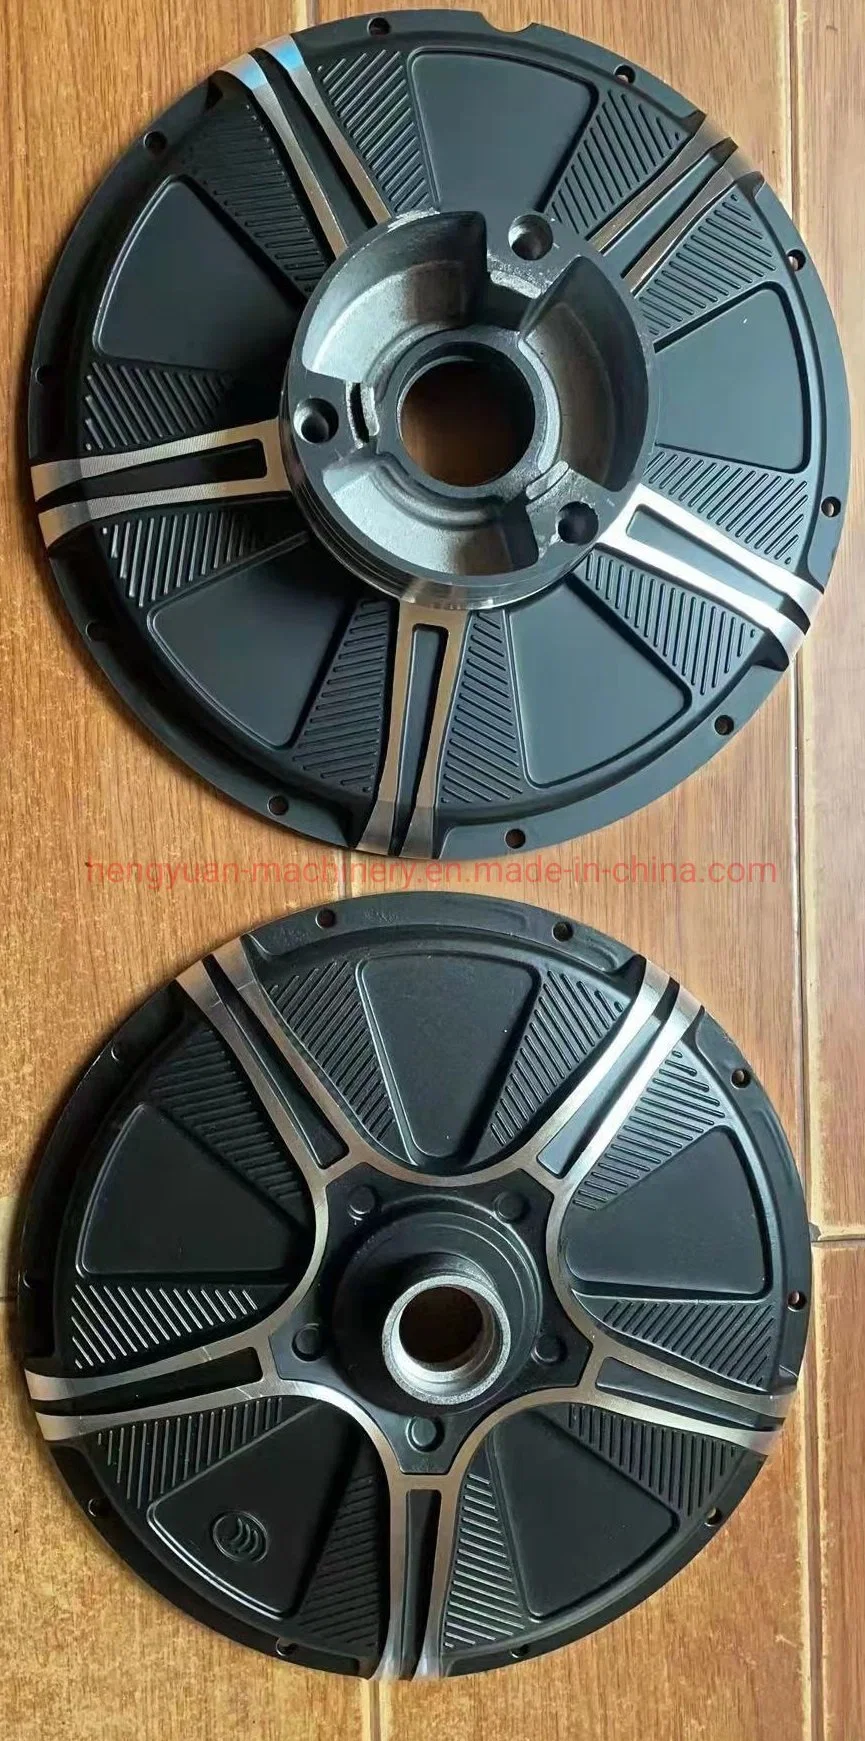 Aluminum Alloy Die-Casting Parts for Electric Bicycle Wheels, Auto Parts, and Communication Products